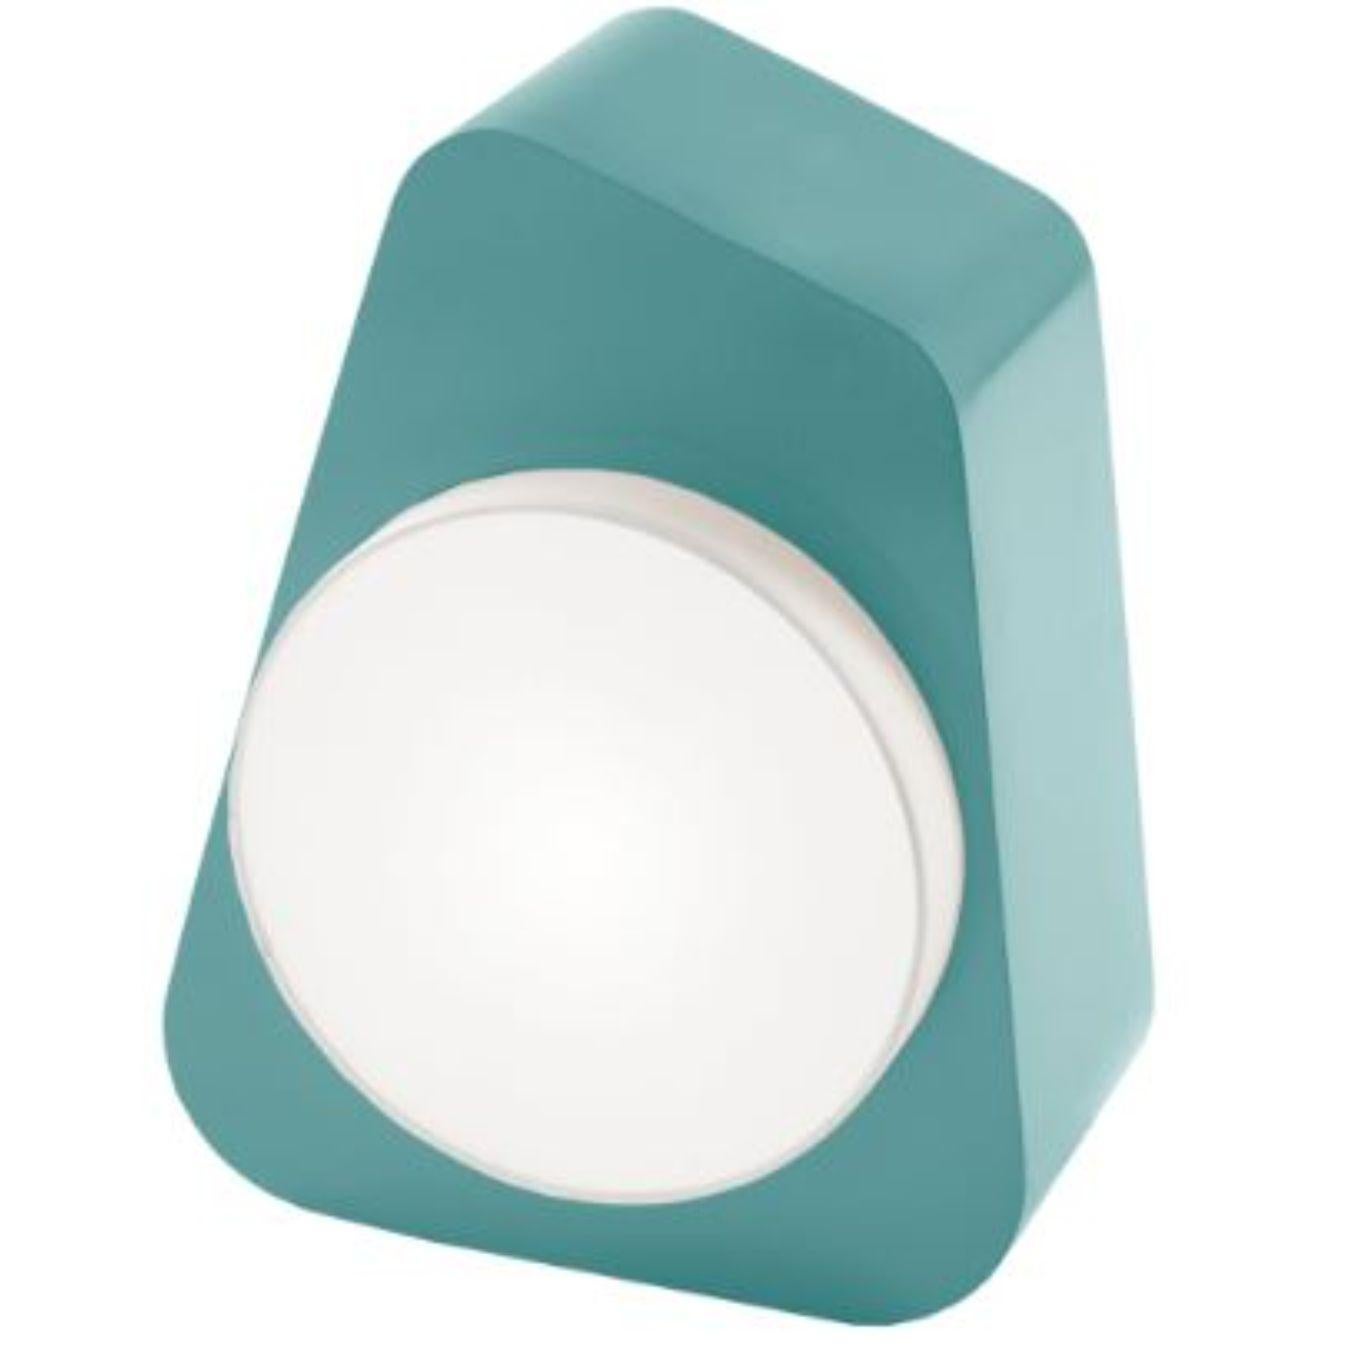 Mint Carousel wall lamp by Dooq
Dimensions: W 30 x D 18 x H 40 cm
Materials: lacquered metal
abat-jour: cotton
Also available in different colours and materials.

Information:
230V/50Hz
E27/1x25W LED
120V/60Hz
E26/1x10W LED
bulb not included

All